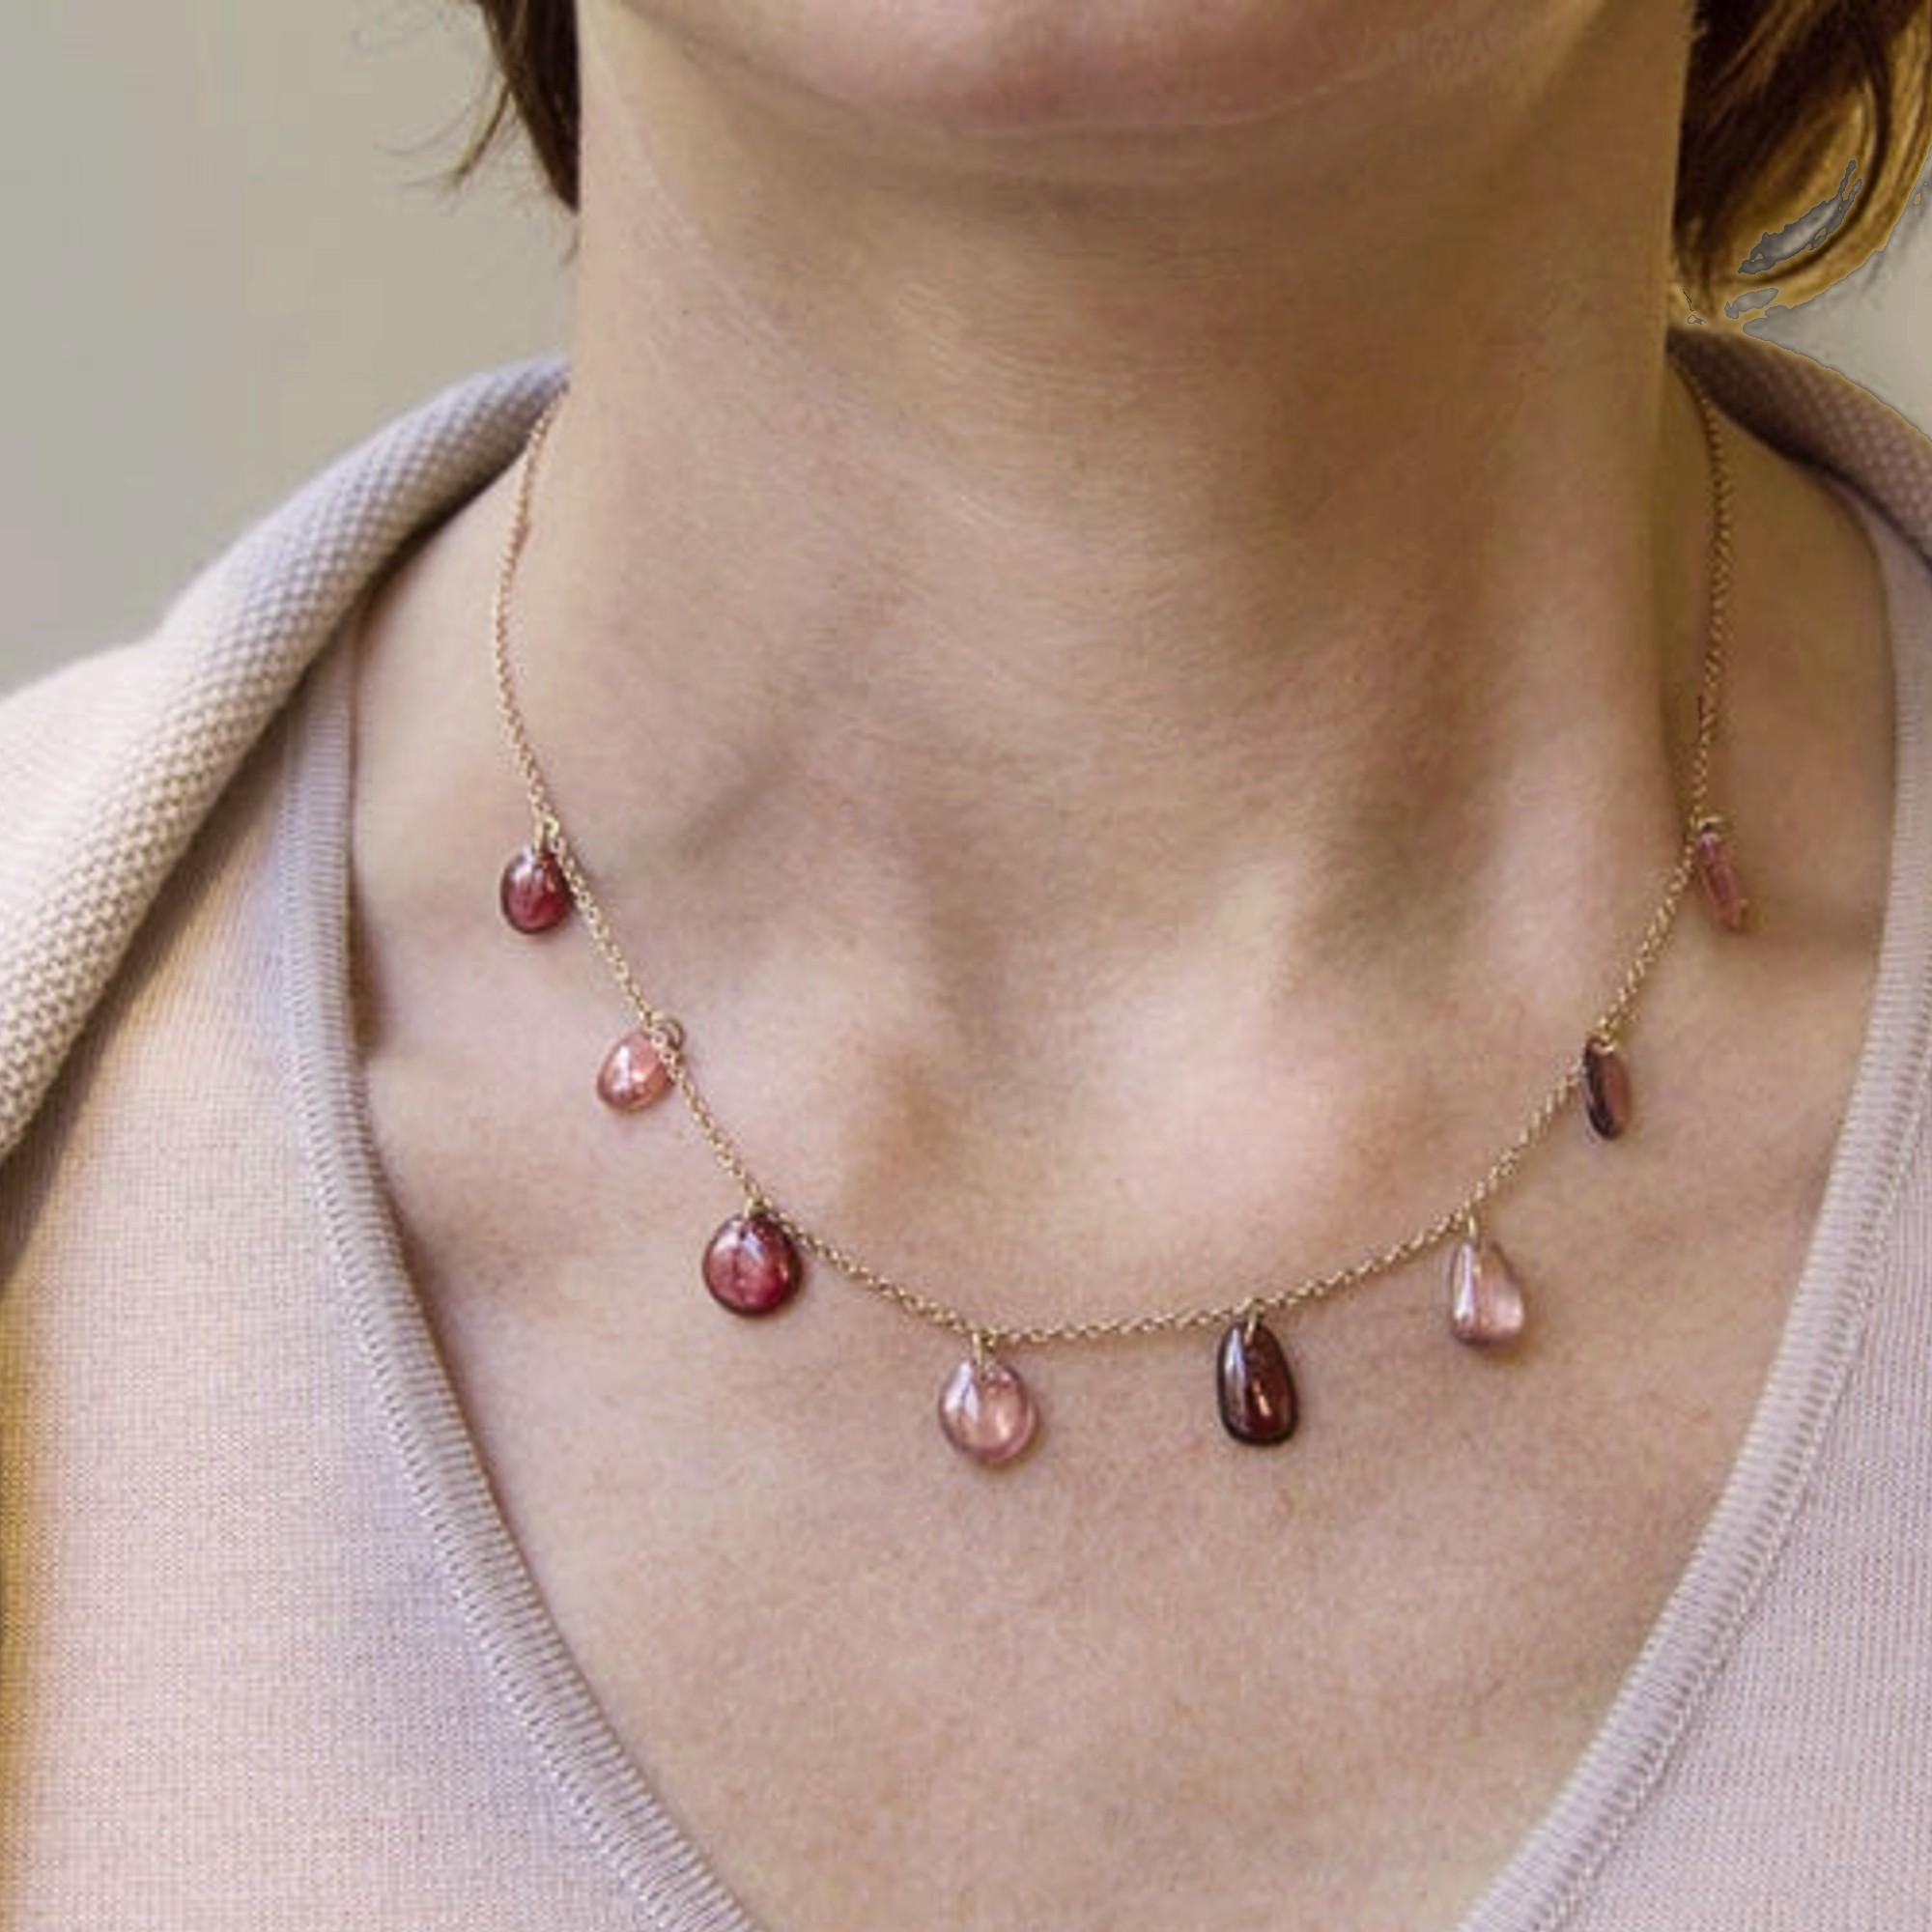 Alex Jona design collection, Hand crafted in Italy, 18 Karat Rose gold chain necklace suspending 8 irregular flat cabochon cut Red and Pink Burmese Spinels. 
Dimension: L 17.71 in/ 45 cm X D stone 0.15 in/ 3.81 cm
Weight : 6.9 g

Alex Jona jewels